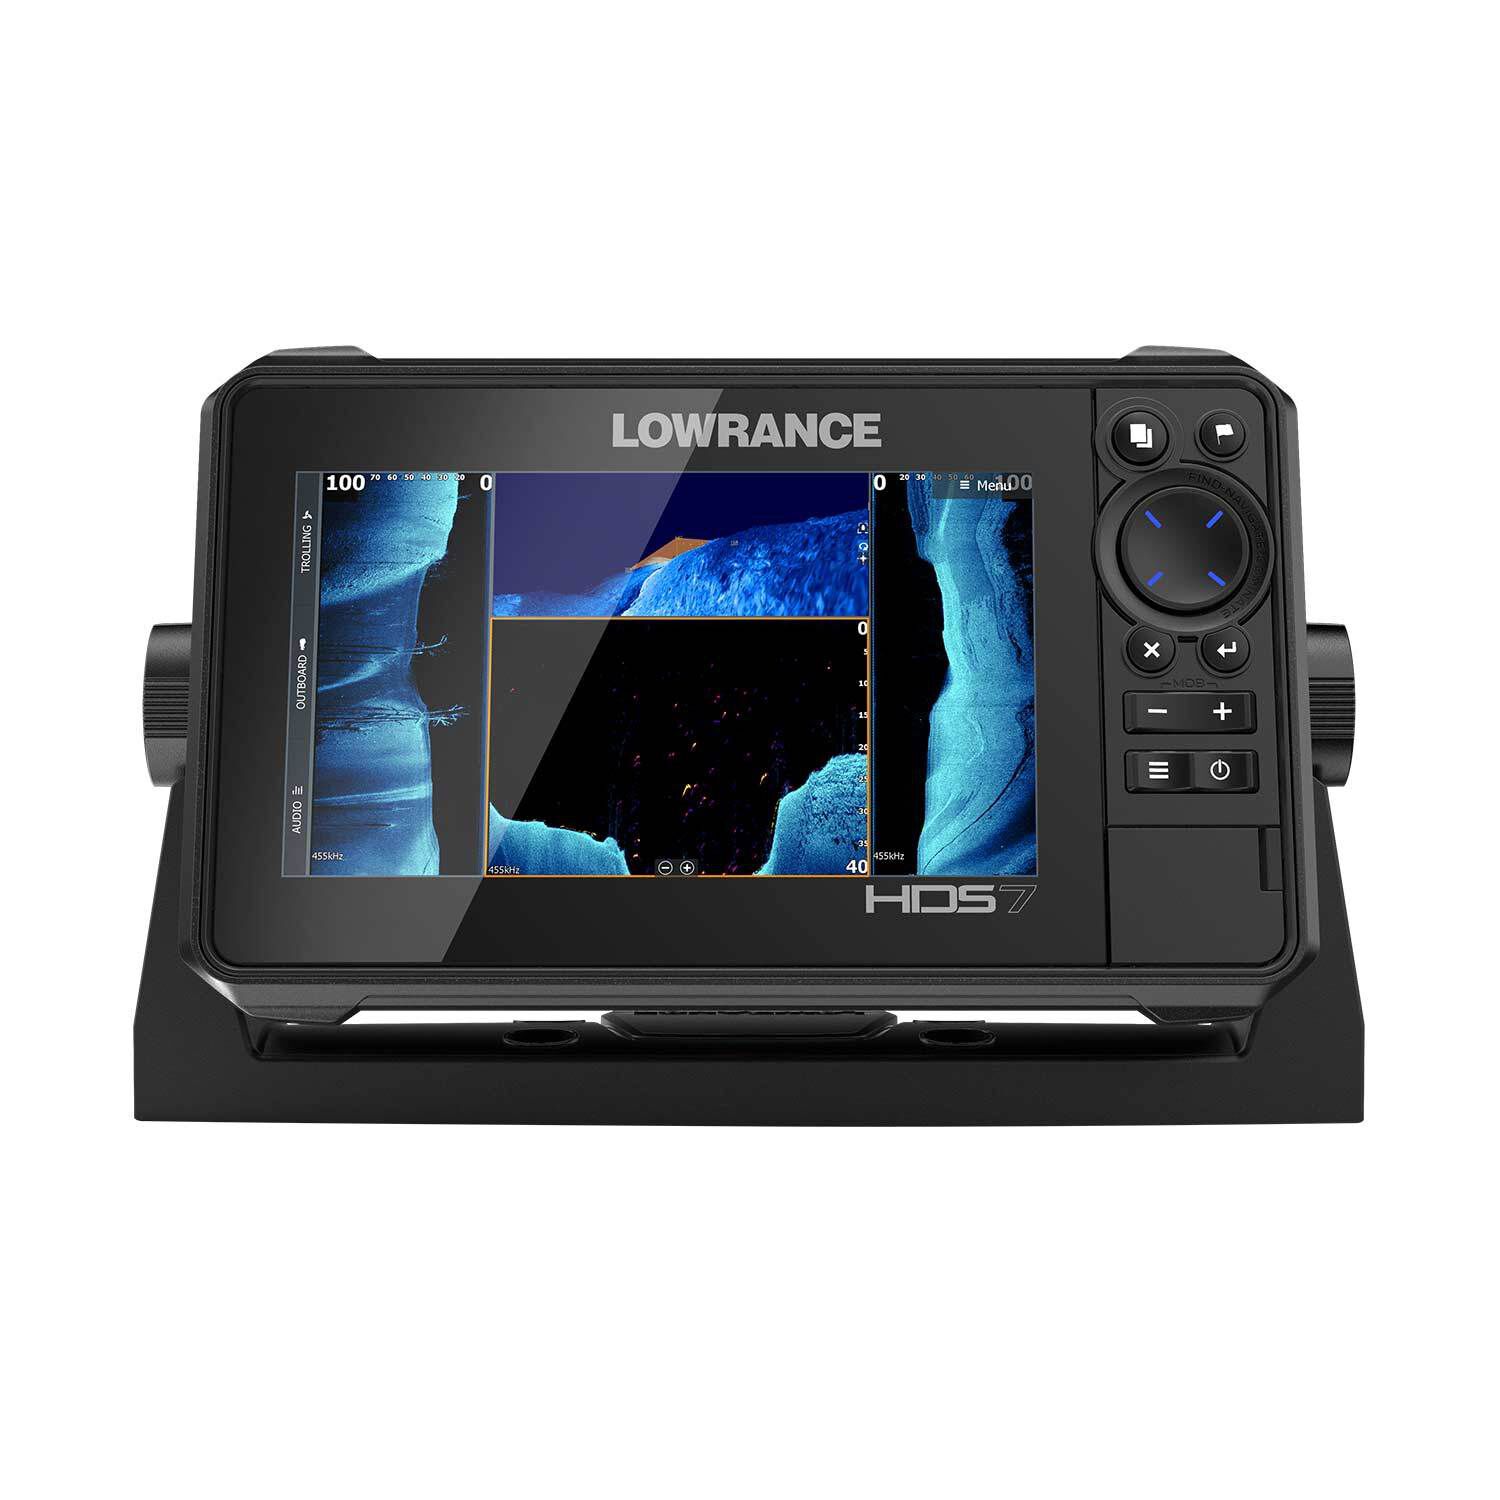 LOWRANCE HDS LIVE 7 Fishfinder/Chartplotter Combo with Active